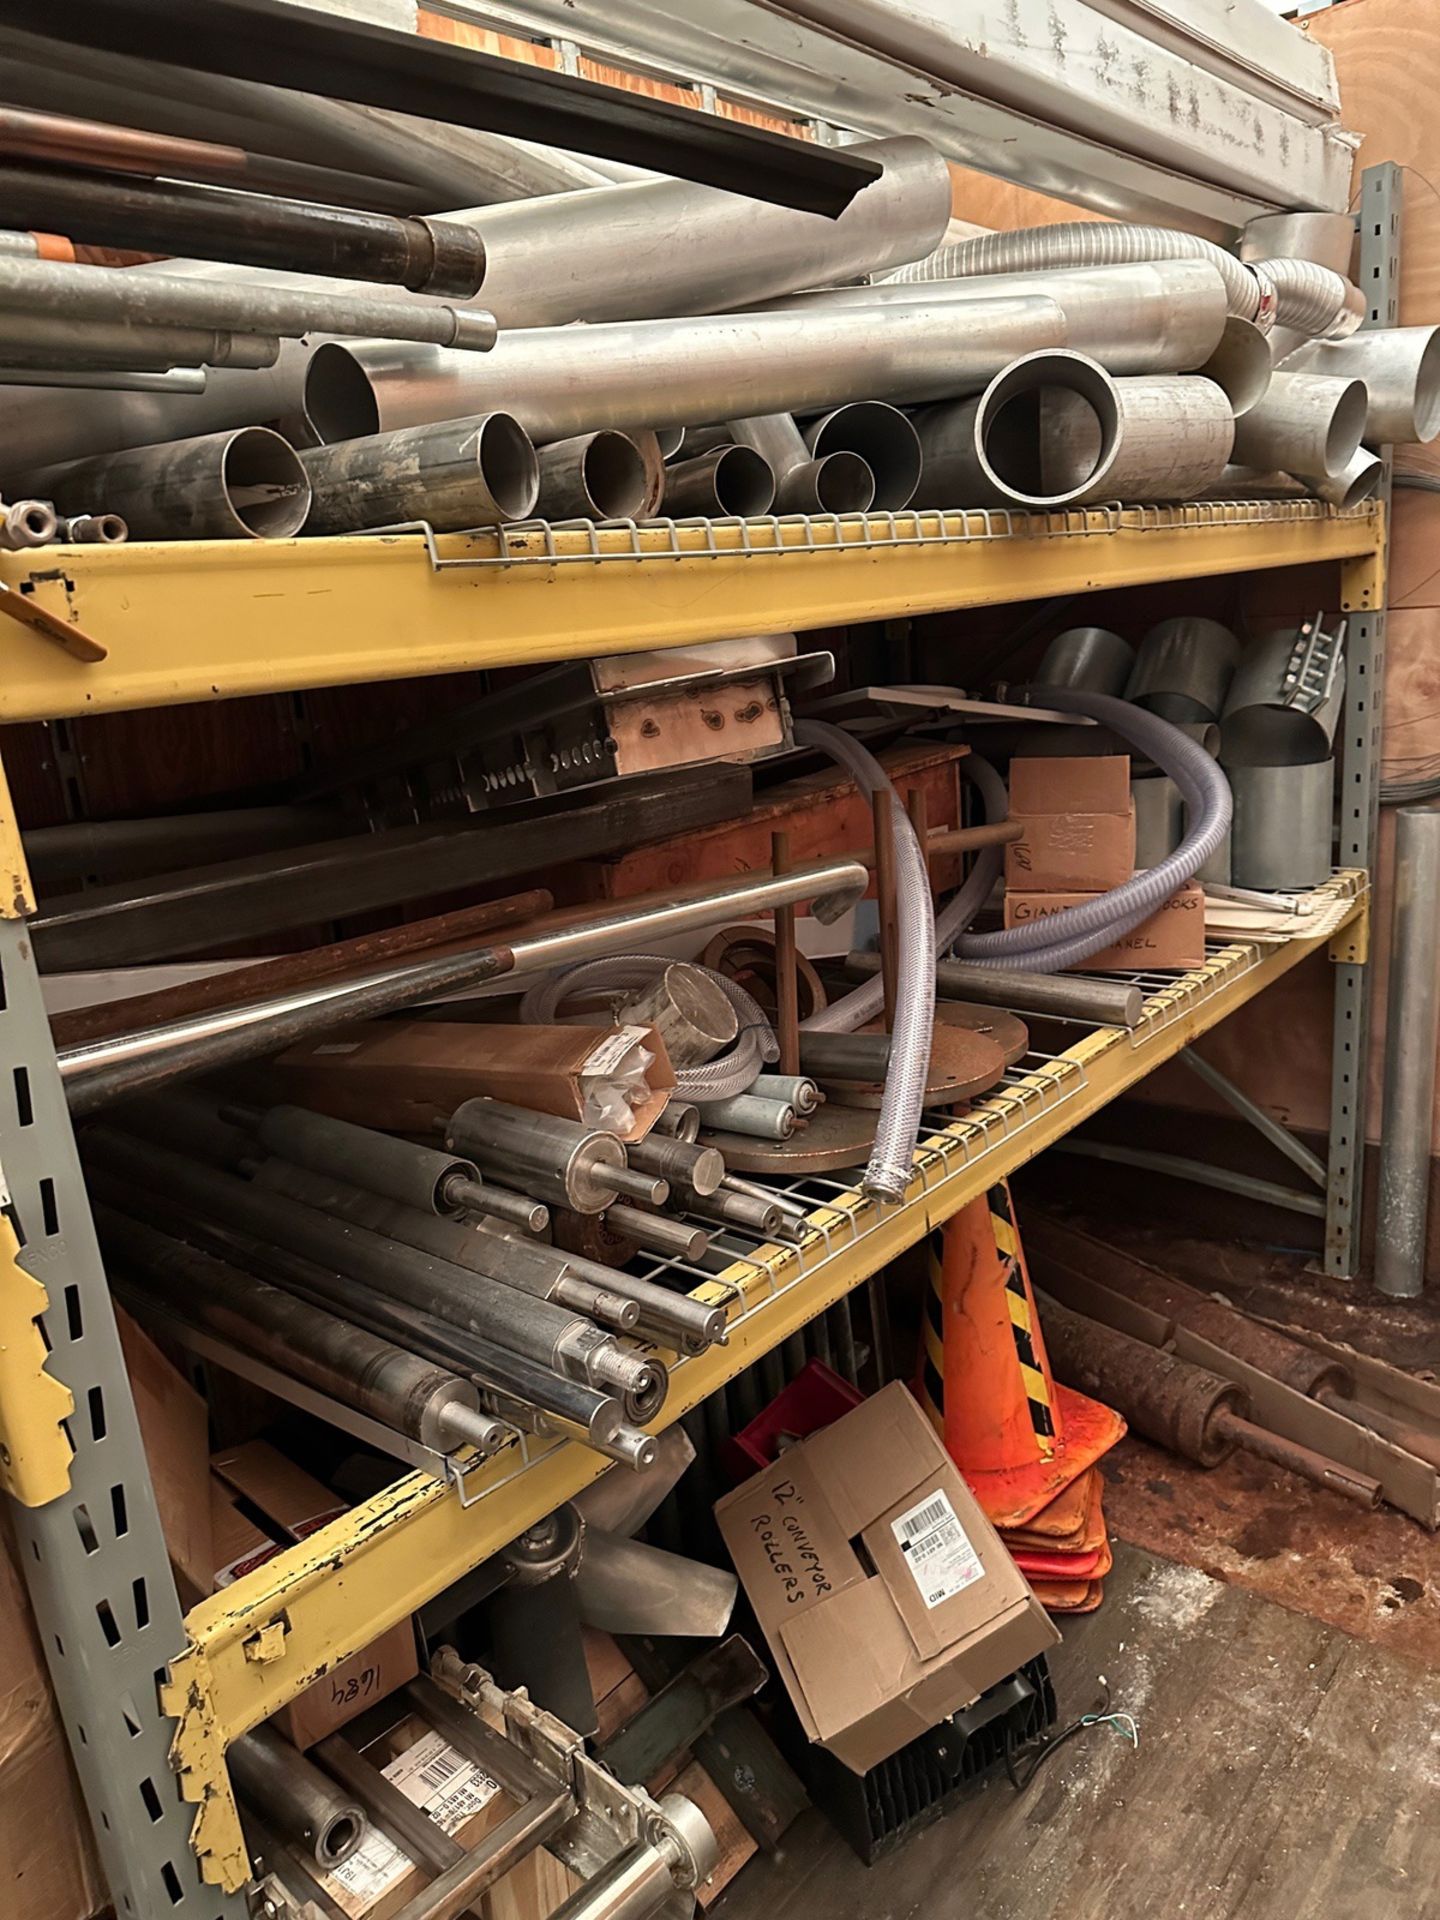 Lot of Trailer Contents and Shelving Units | Rig Fee $750 - Image 8 of 9